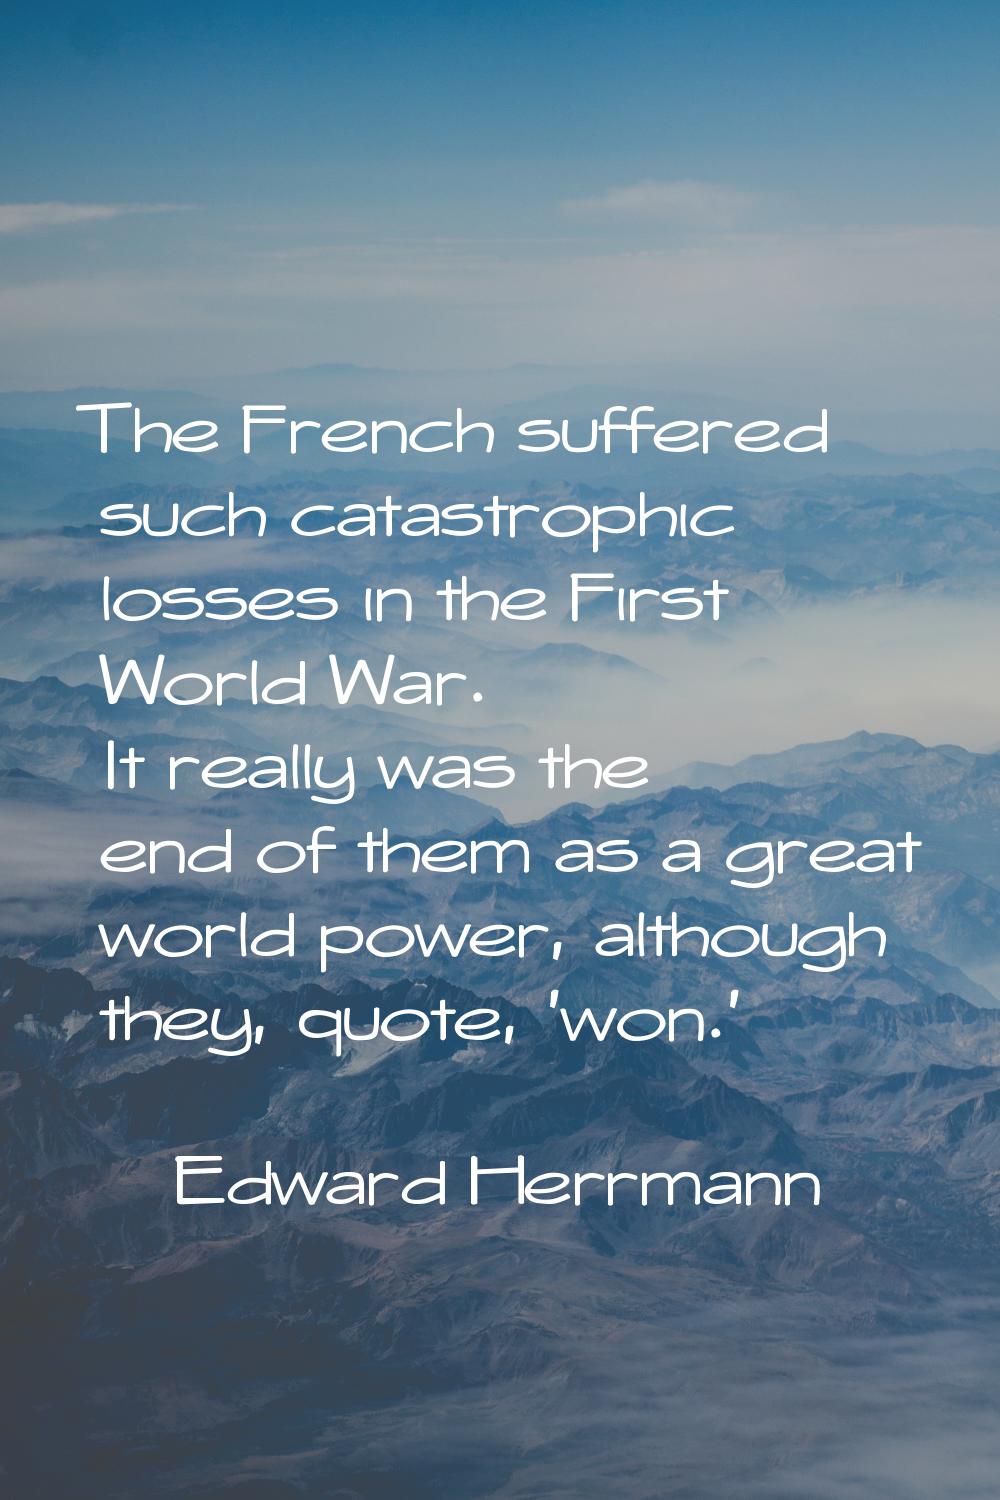 The French suffered such catastrophic losses in the First World War. It really was the end of them 